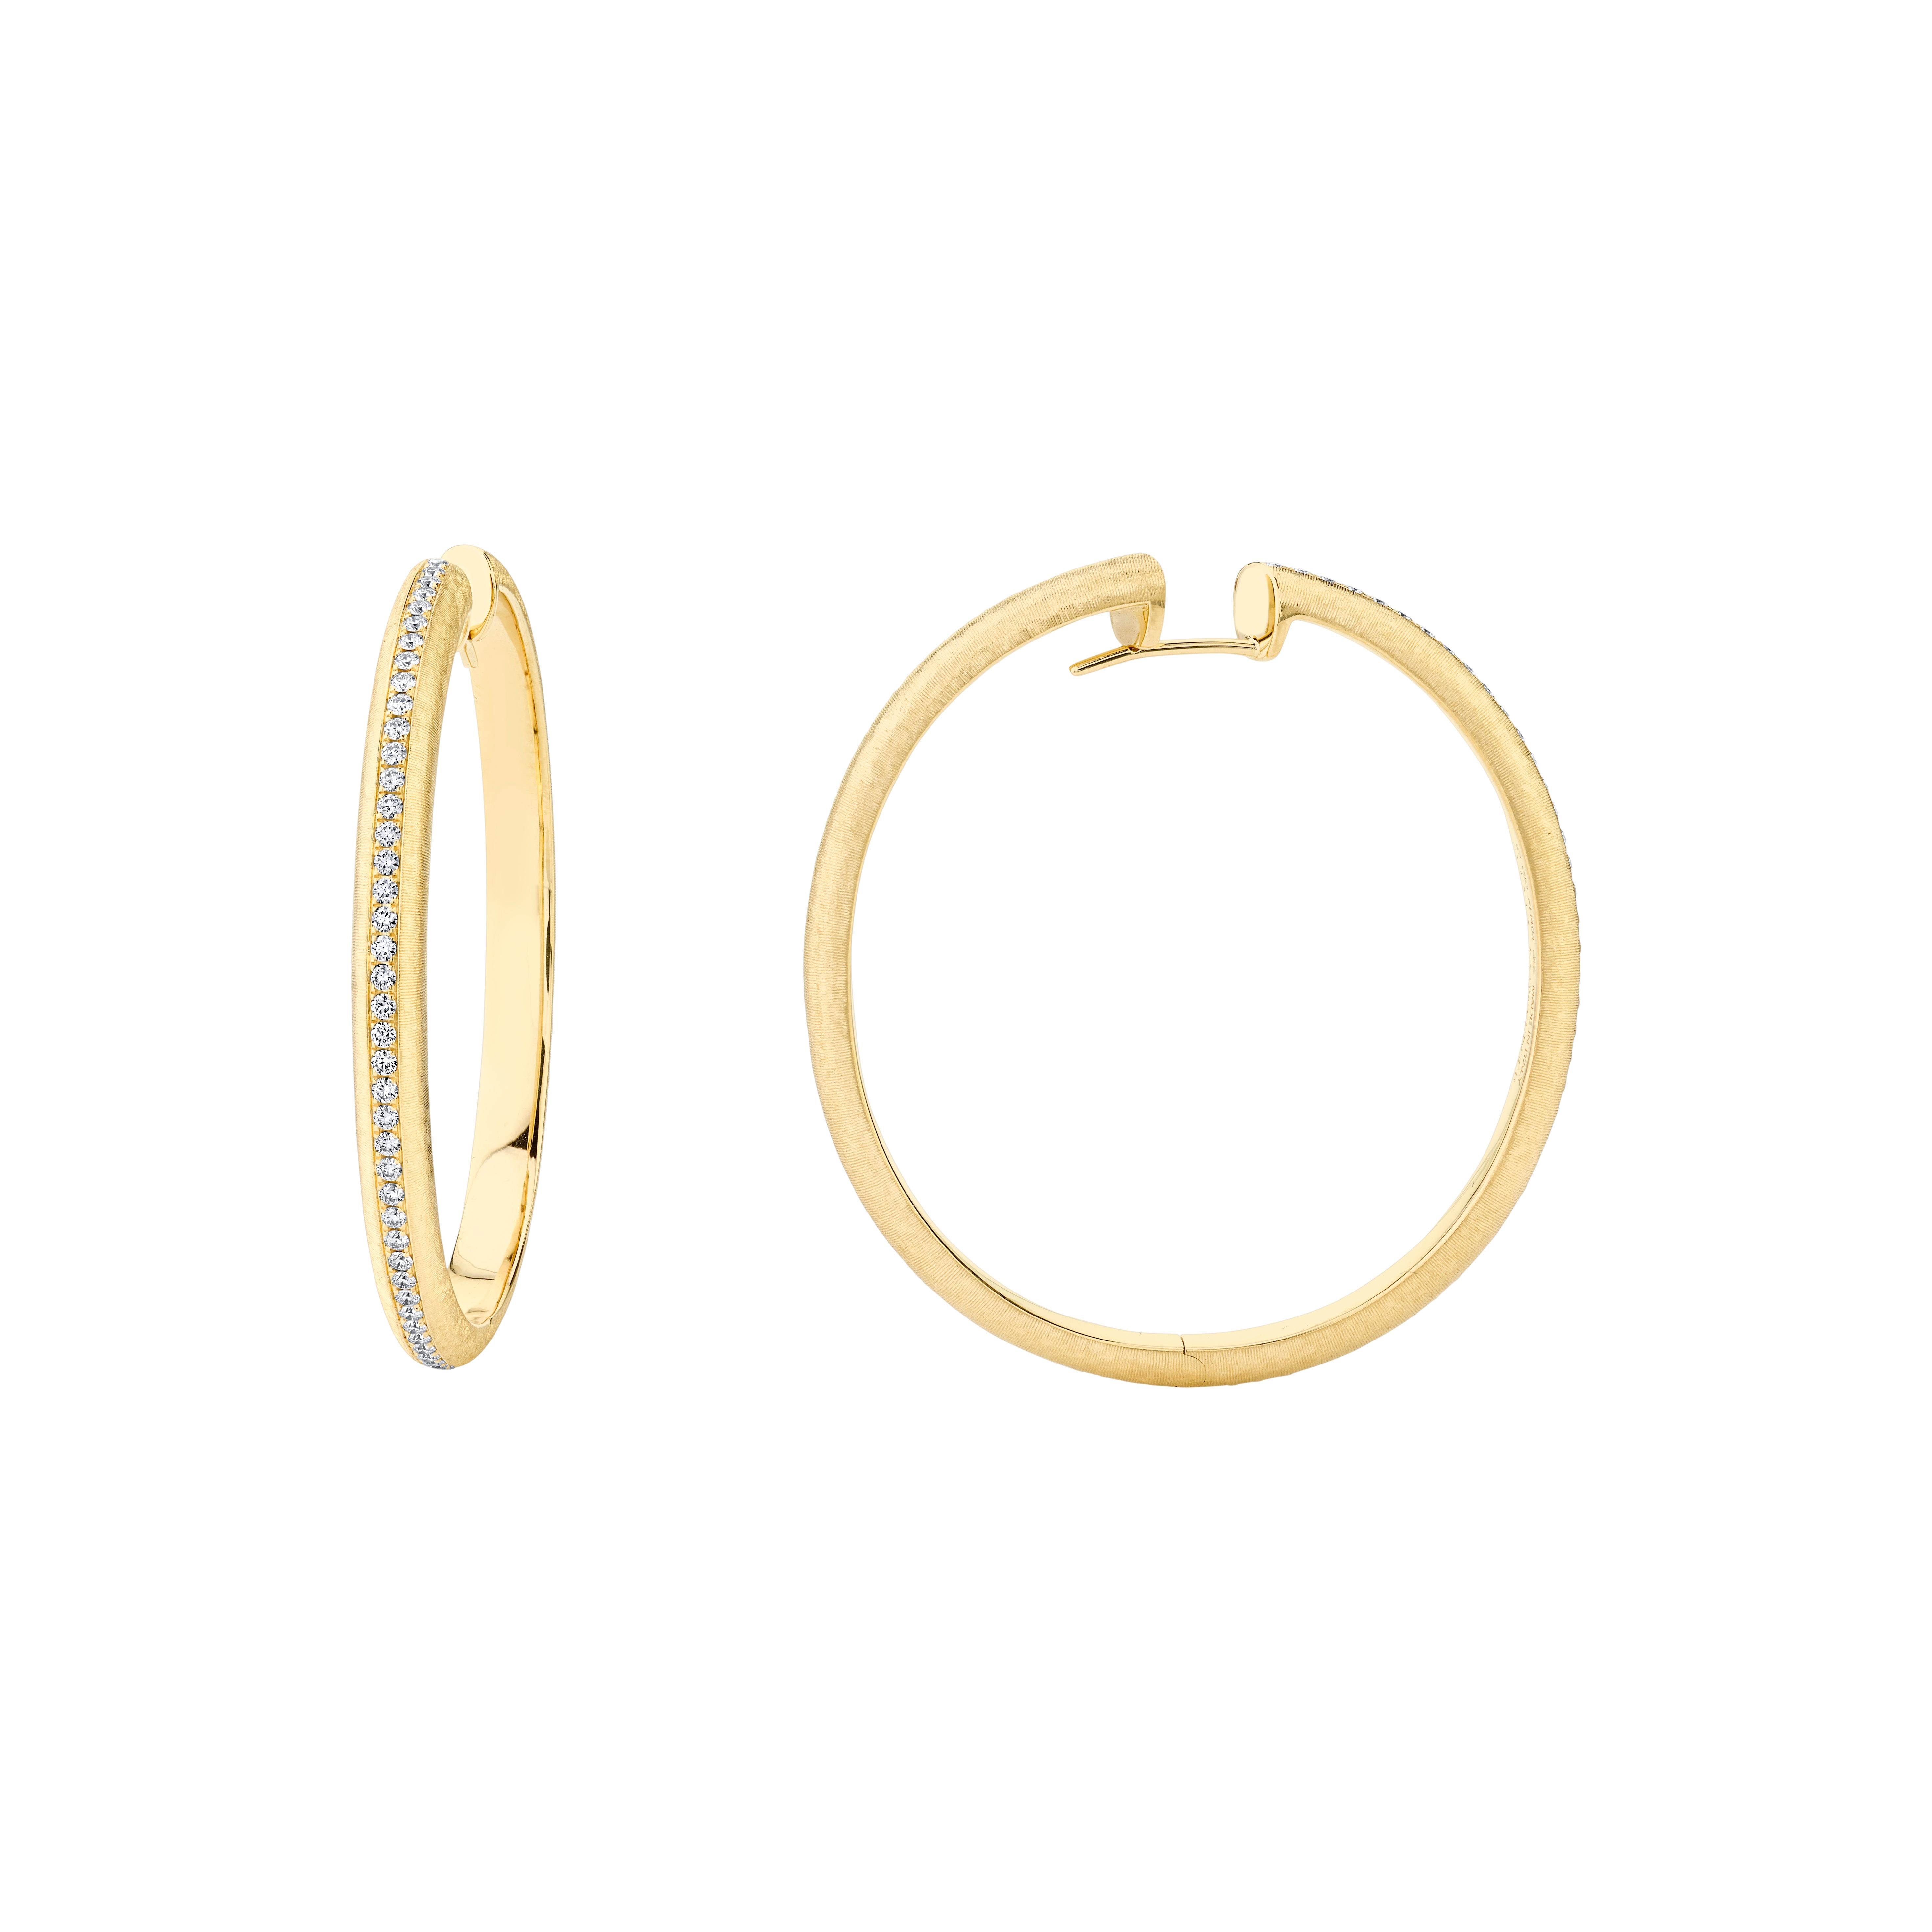 Style #: XH404E.
SYLVIA KONTENTE  18K Yellow gold diamond hoop earrings with hand-engraved finish.
Precision-cut, round brilliant diamonds.
Diamond total weight: 0.78ct tw.
Diamond color/clarity: DEF/VVS VS.
Hand-engraved finish - The ancient art of